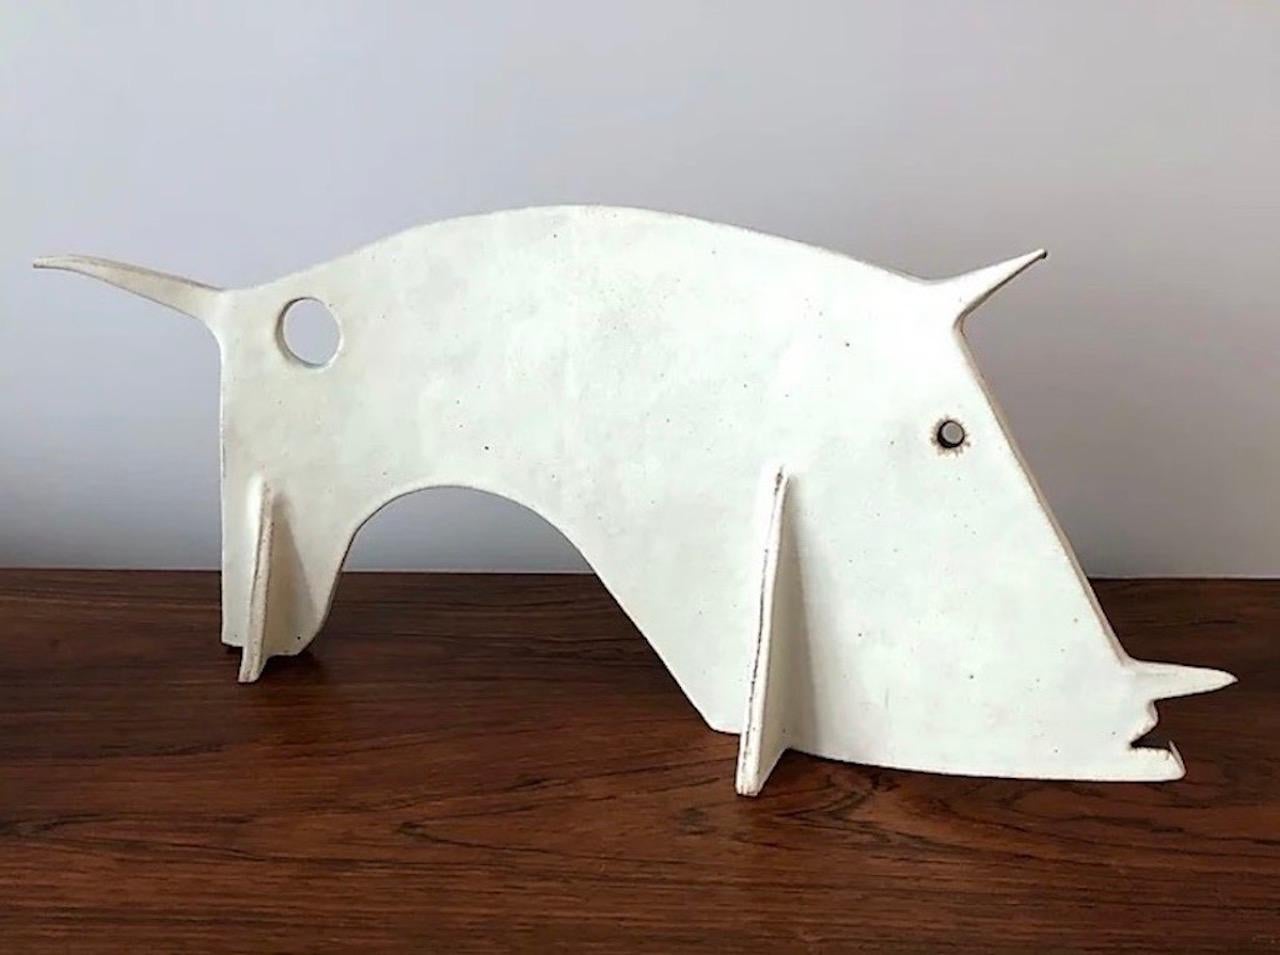 Large stoneware famous animal sculpture by Bruno Gambone
Measures: H 22 cm x L 50 cm
 
Artist-signed Gambone Italy at base.

About the artist:
Bruno Gambone (born in 1936) is an Italian ceramist and the son of Guido Gambone, one of Italy's